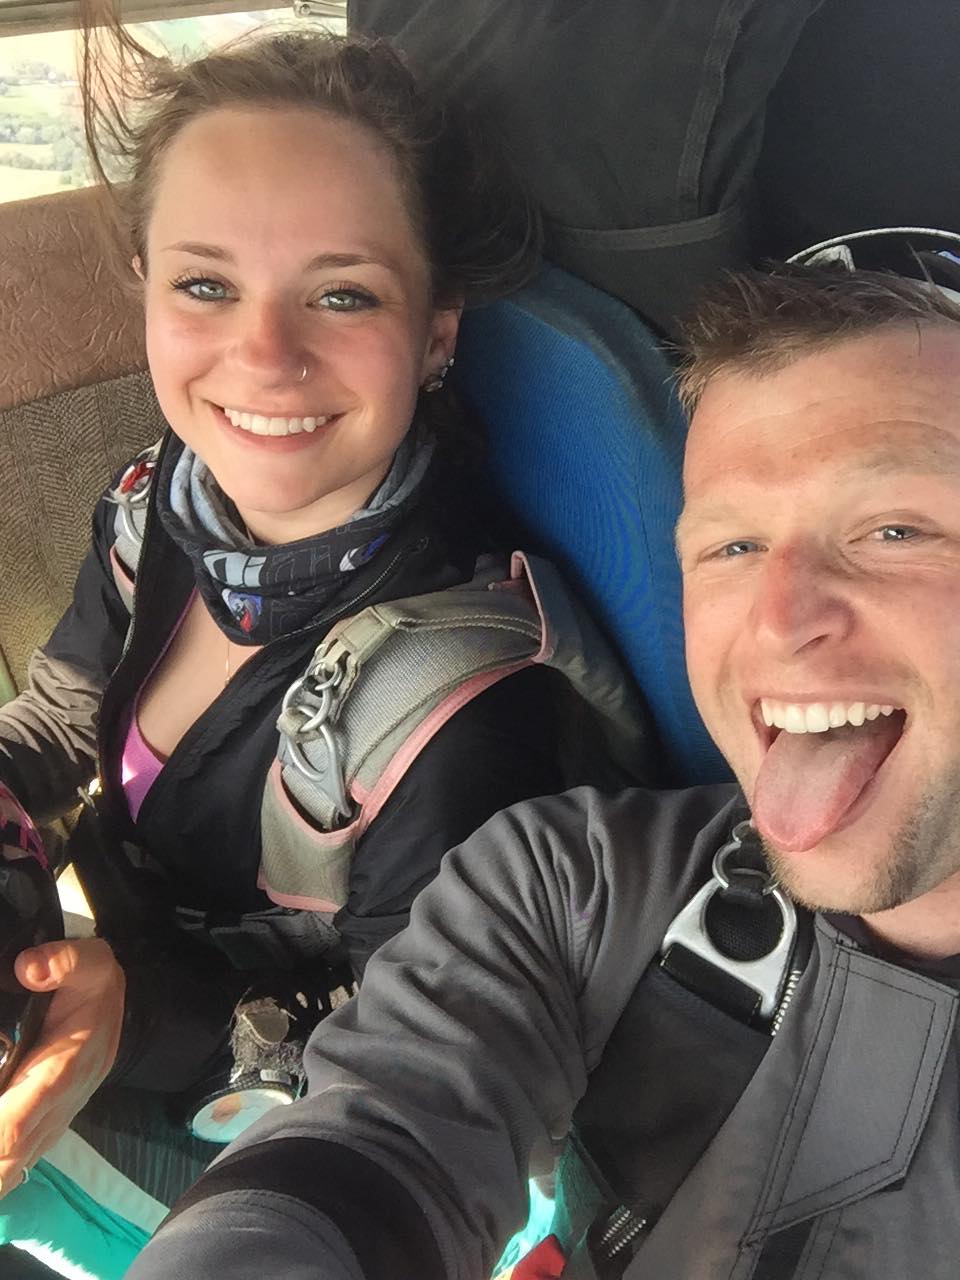 Skydiving couple at Wisconsin Skydiving Center near Chicago